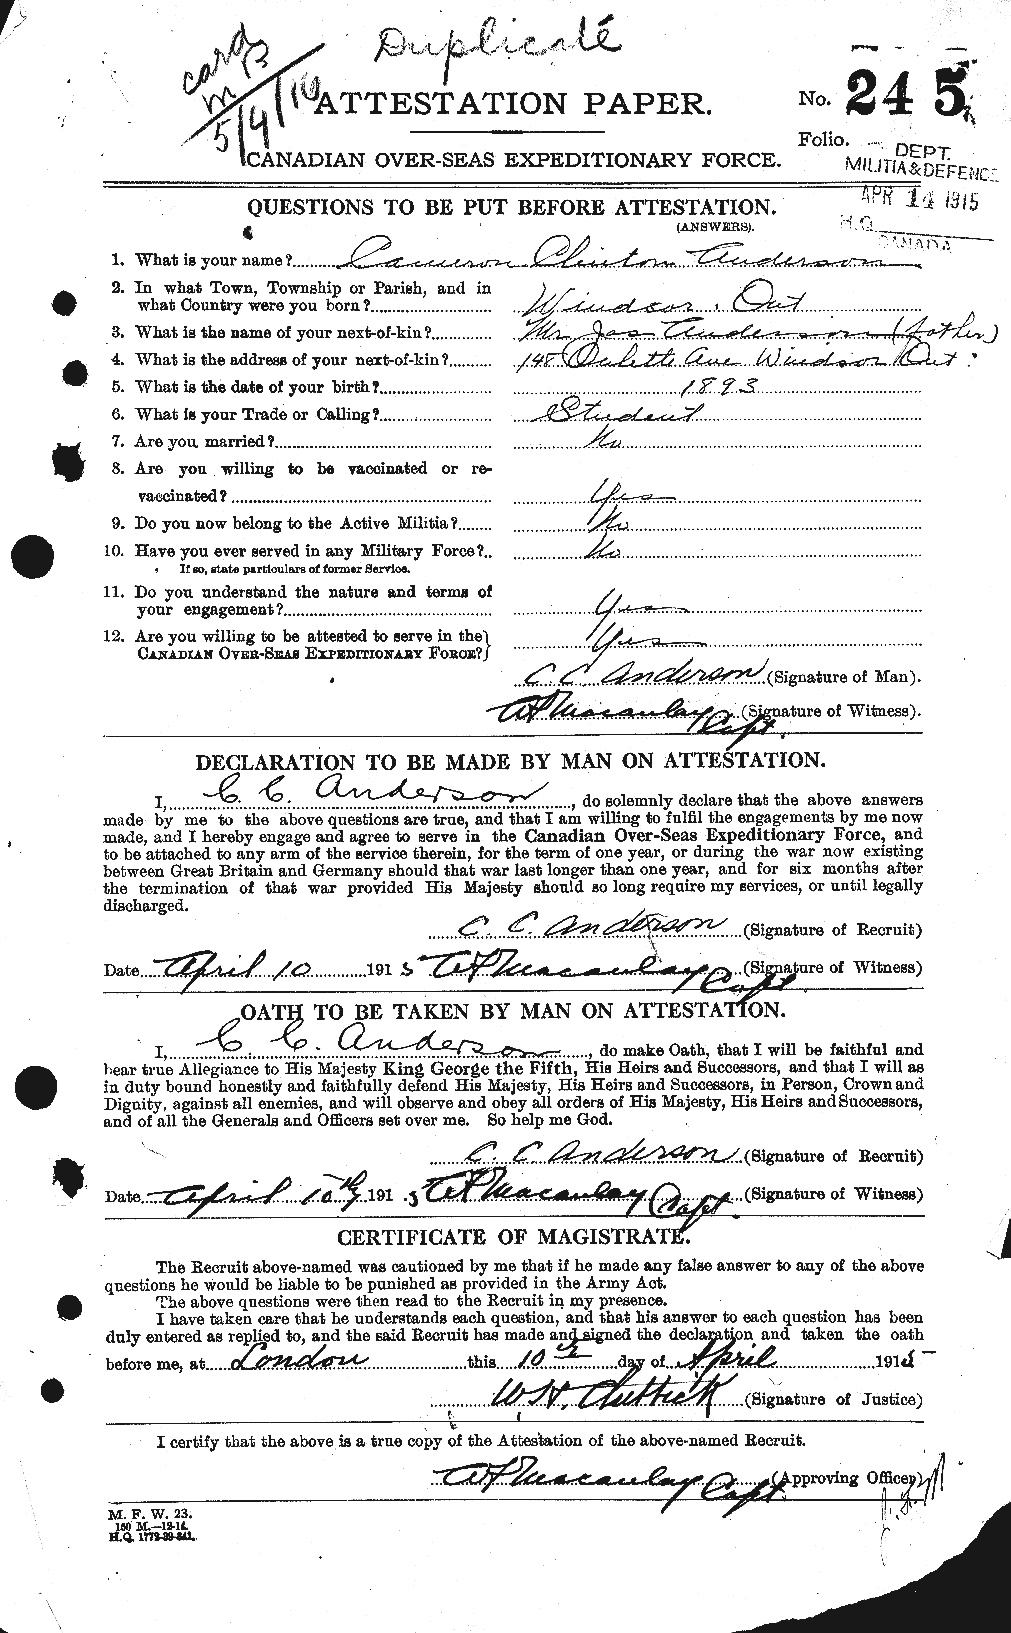 Personnel Records of the First World War - CEF 209298a